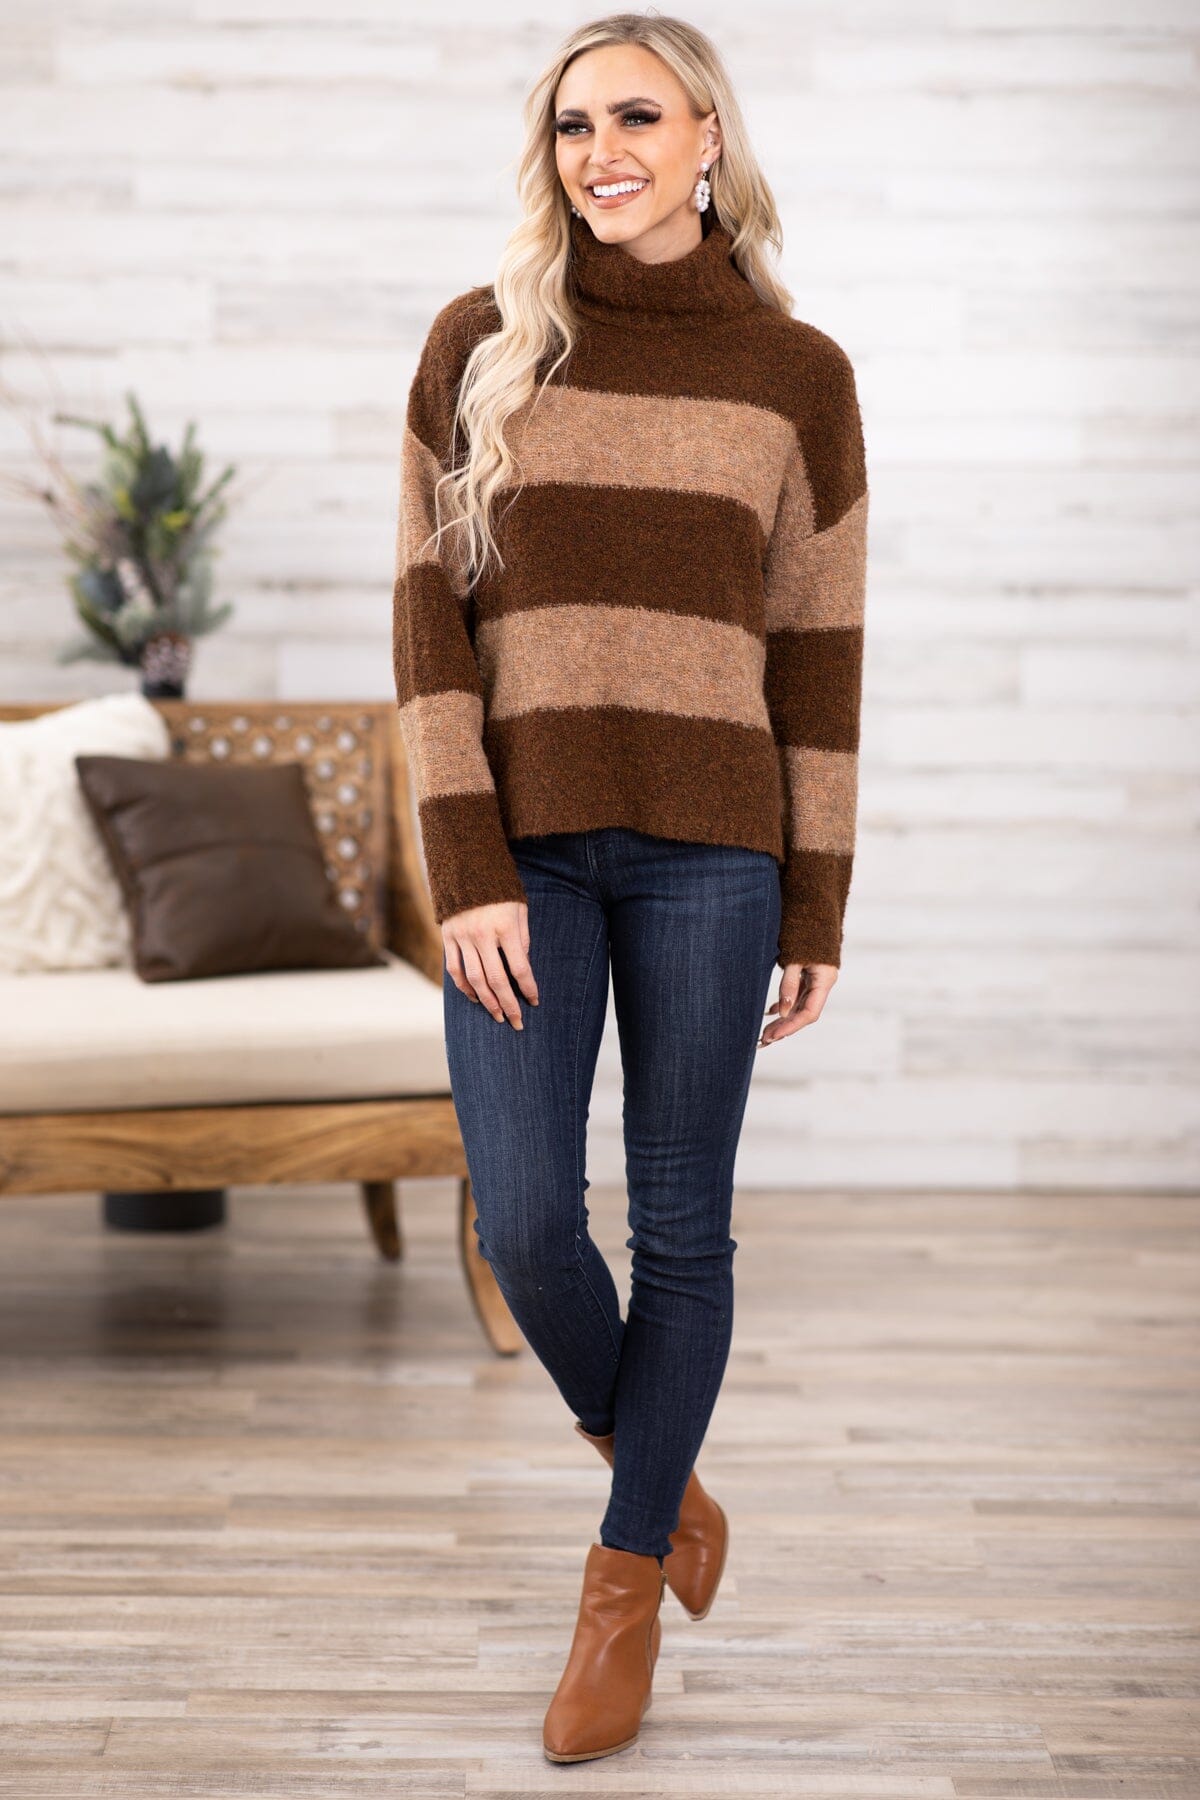 Brown and Tan Colorblock Turtleneck Sweater - Filly Flair